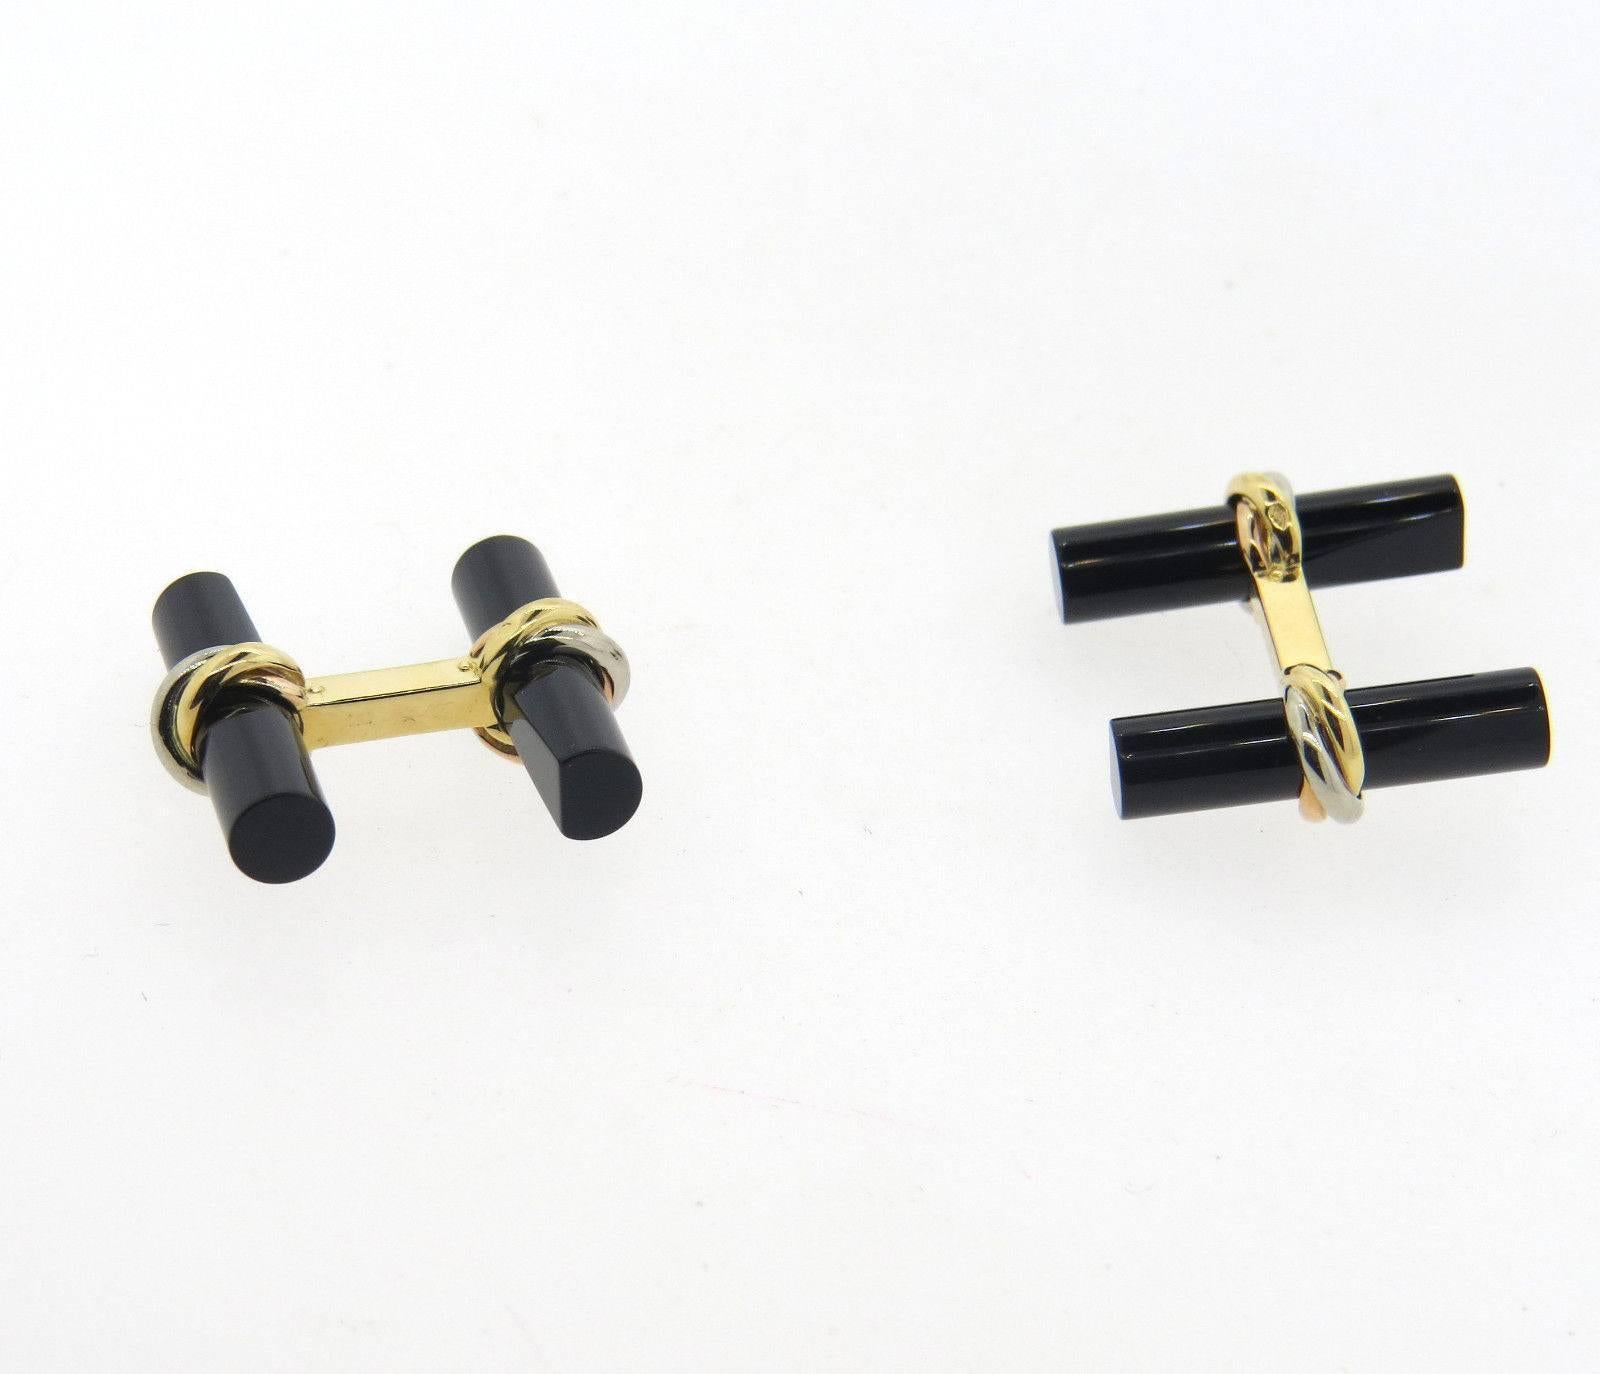 A pair of 18k yellow white and rose gold cufflinks set with onyx.  Crafted by Cartier, the cufflinks measure 22mm x 9mm and weigh 10.5 grams.  Marked:	Cartier, 750, K 14217.